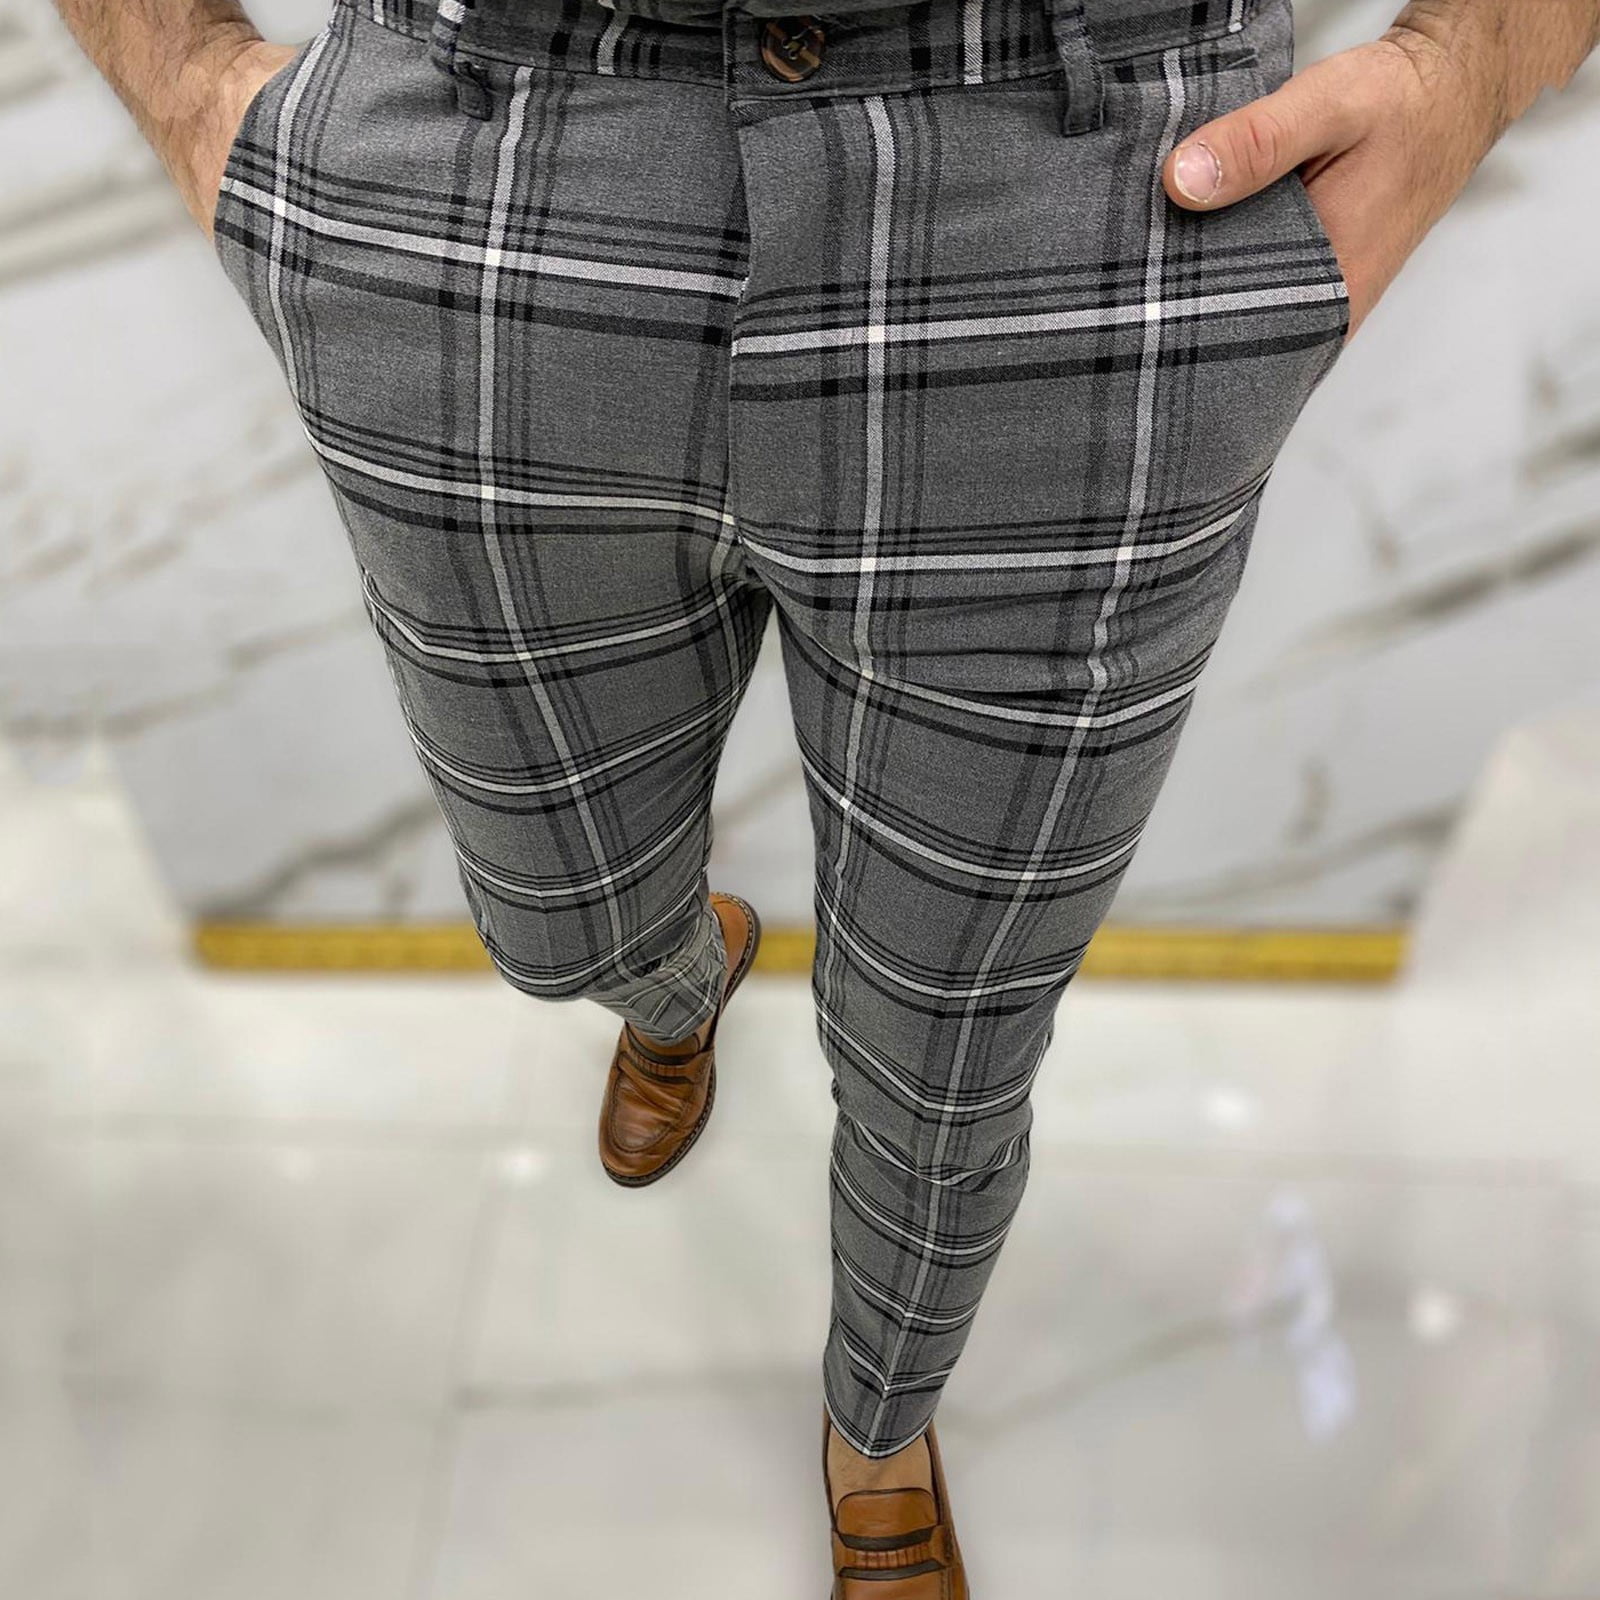 Men Dress Pants,Mens Casual Plaid Stretch Flat-Front Skinny Business Pencil  Long Pants Trousers with Pockets